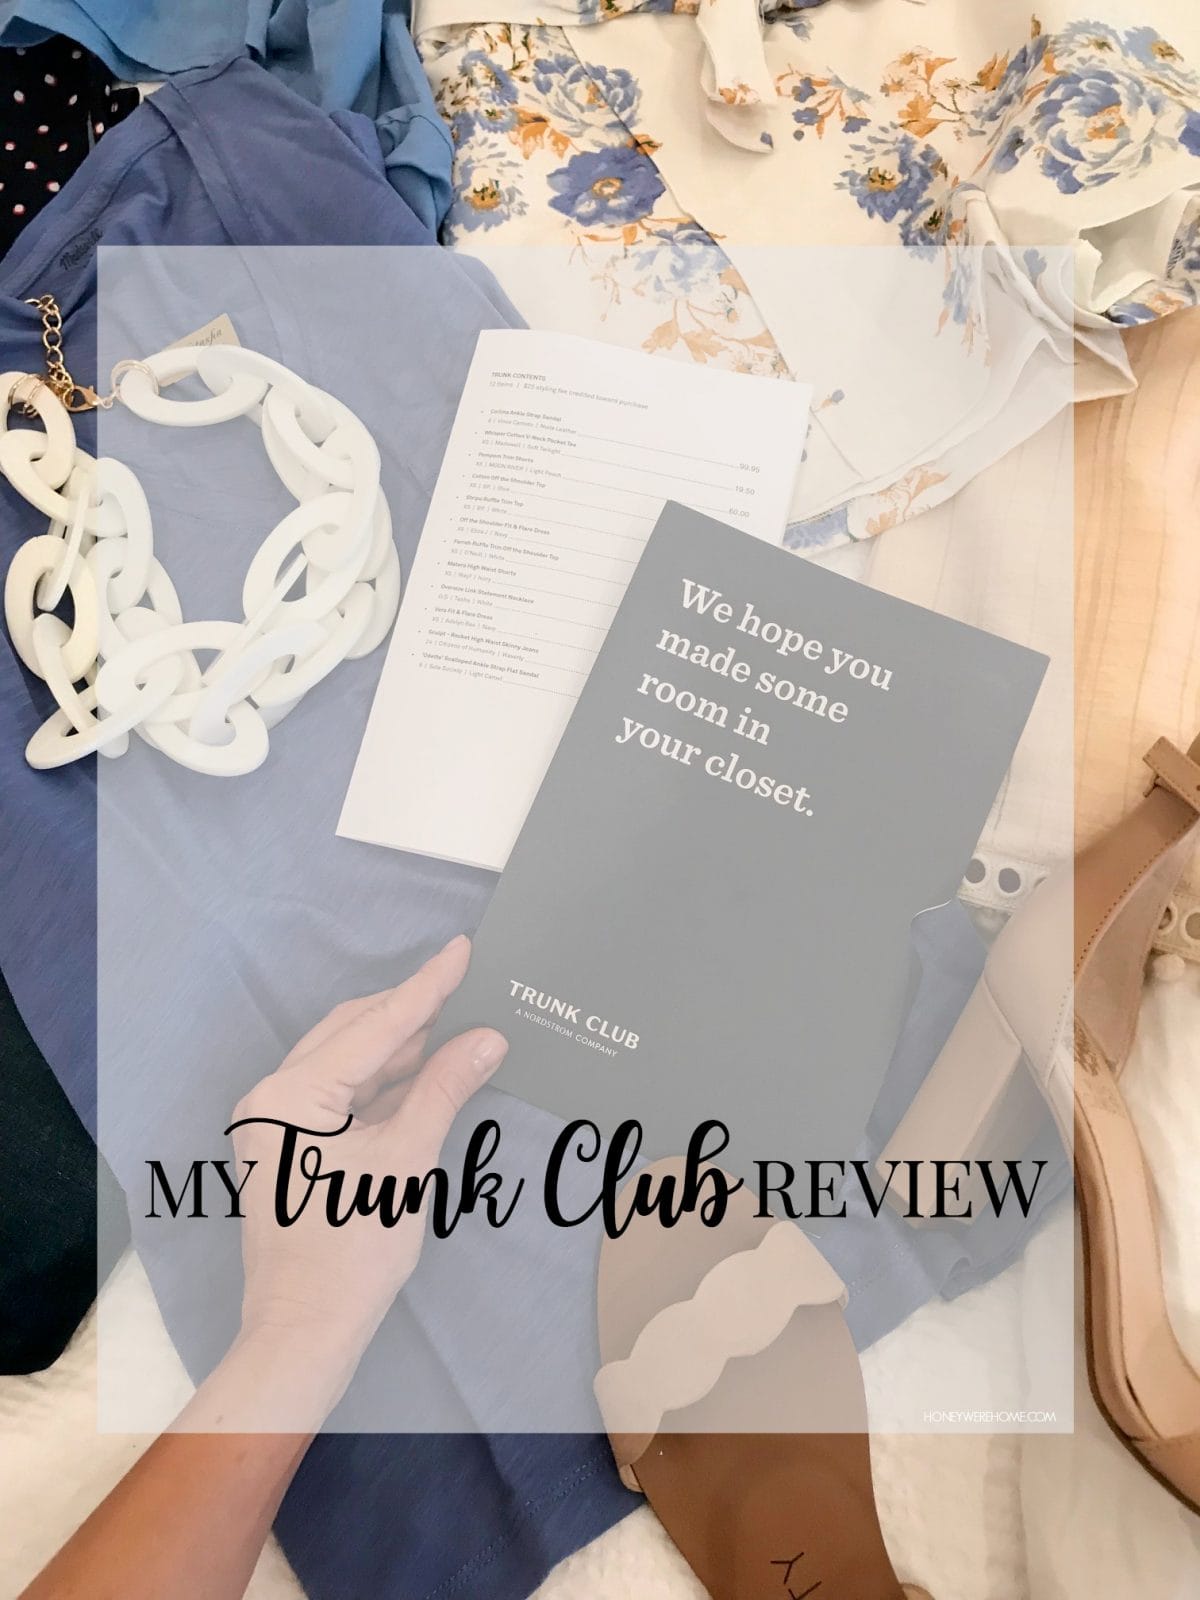 My Trunk Club Review